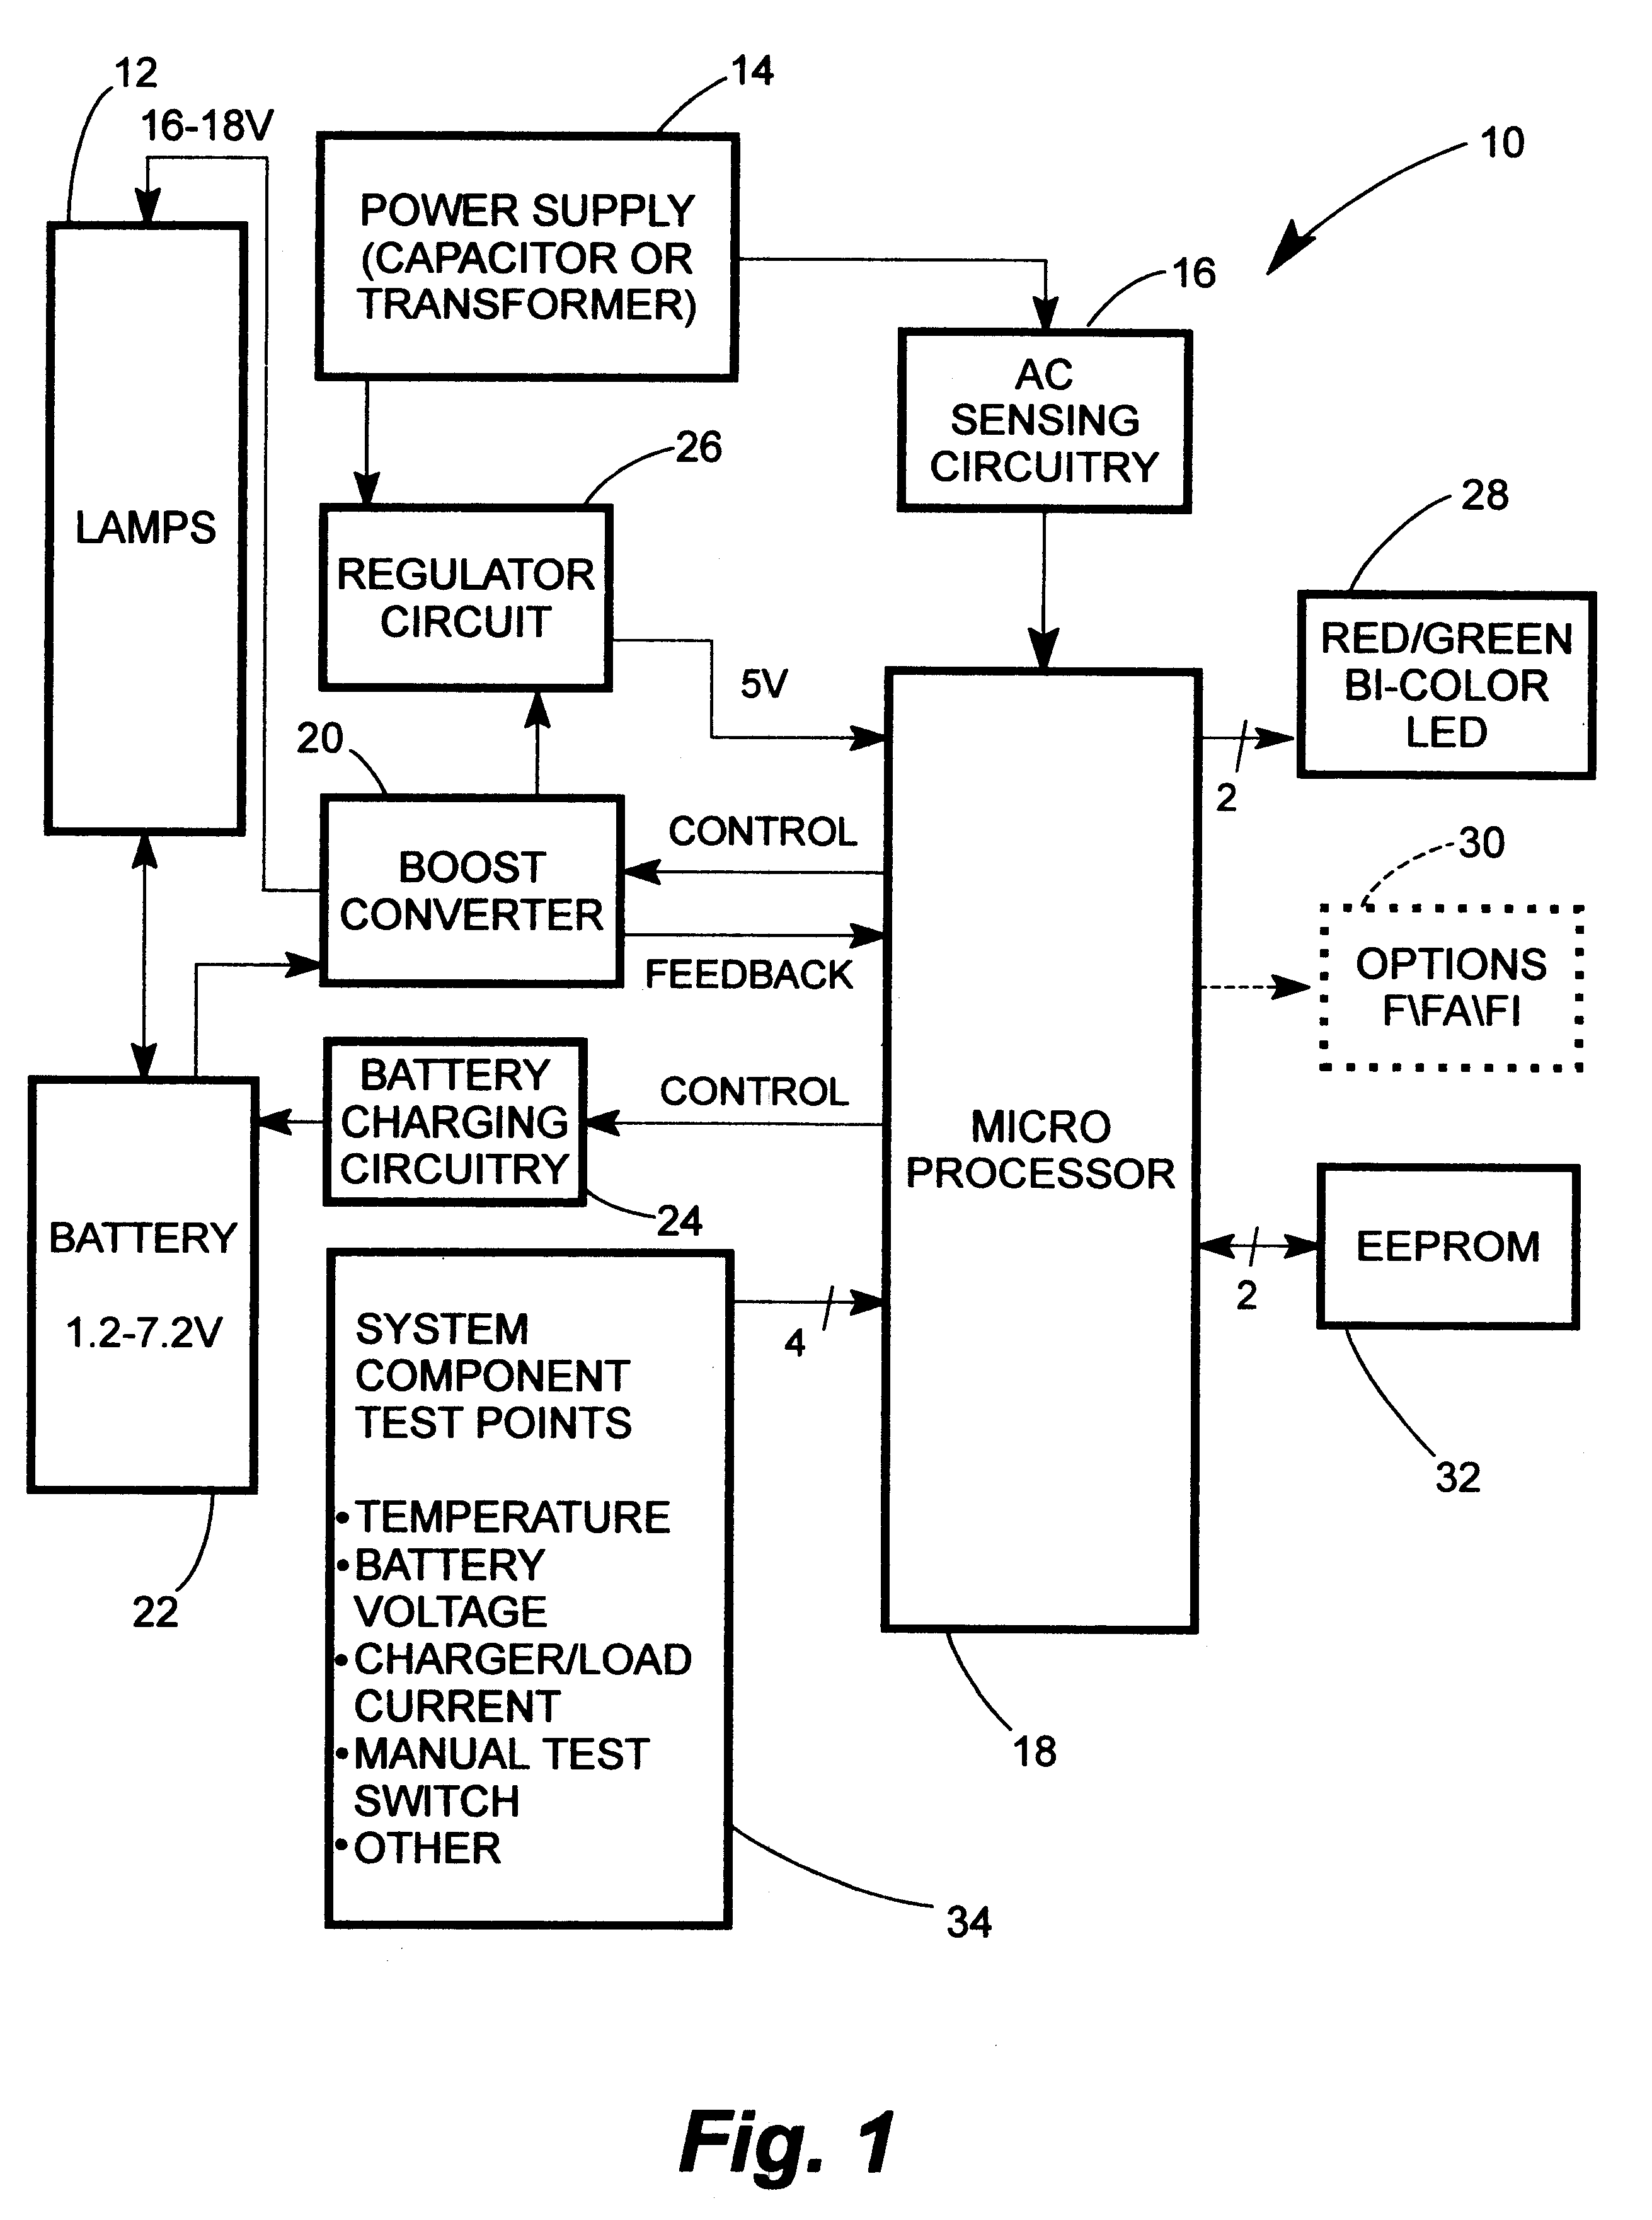 Self-diagnostic circuitry for emergency lighting fixtures